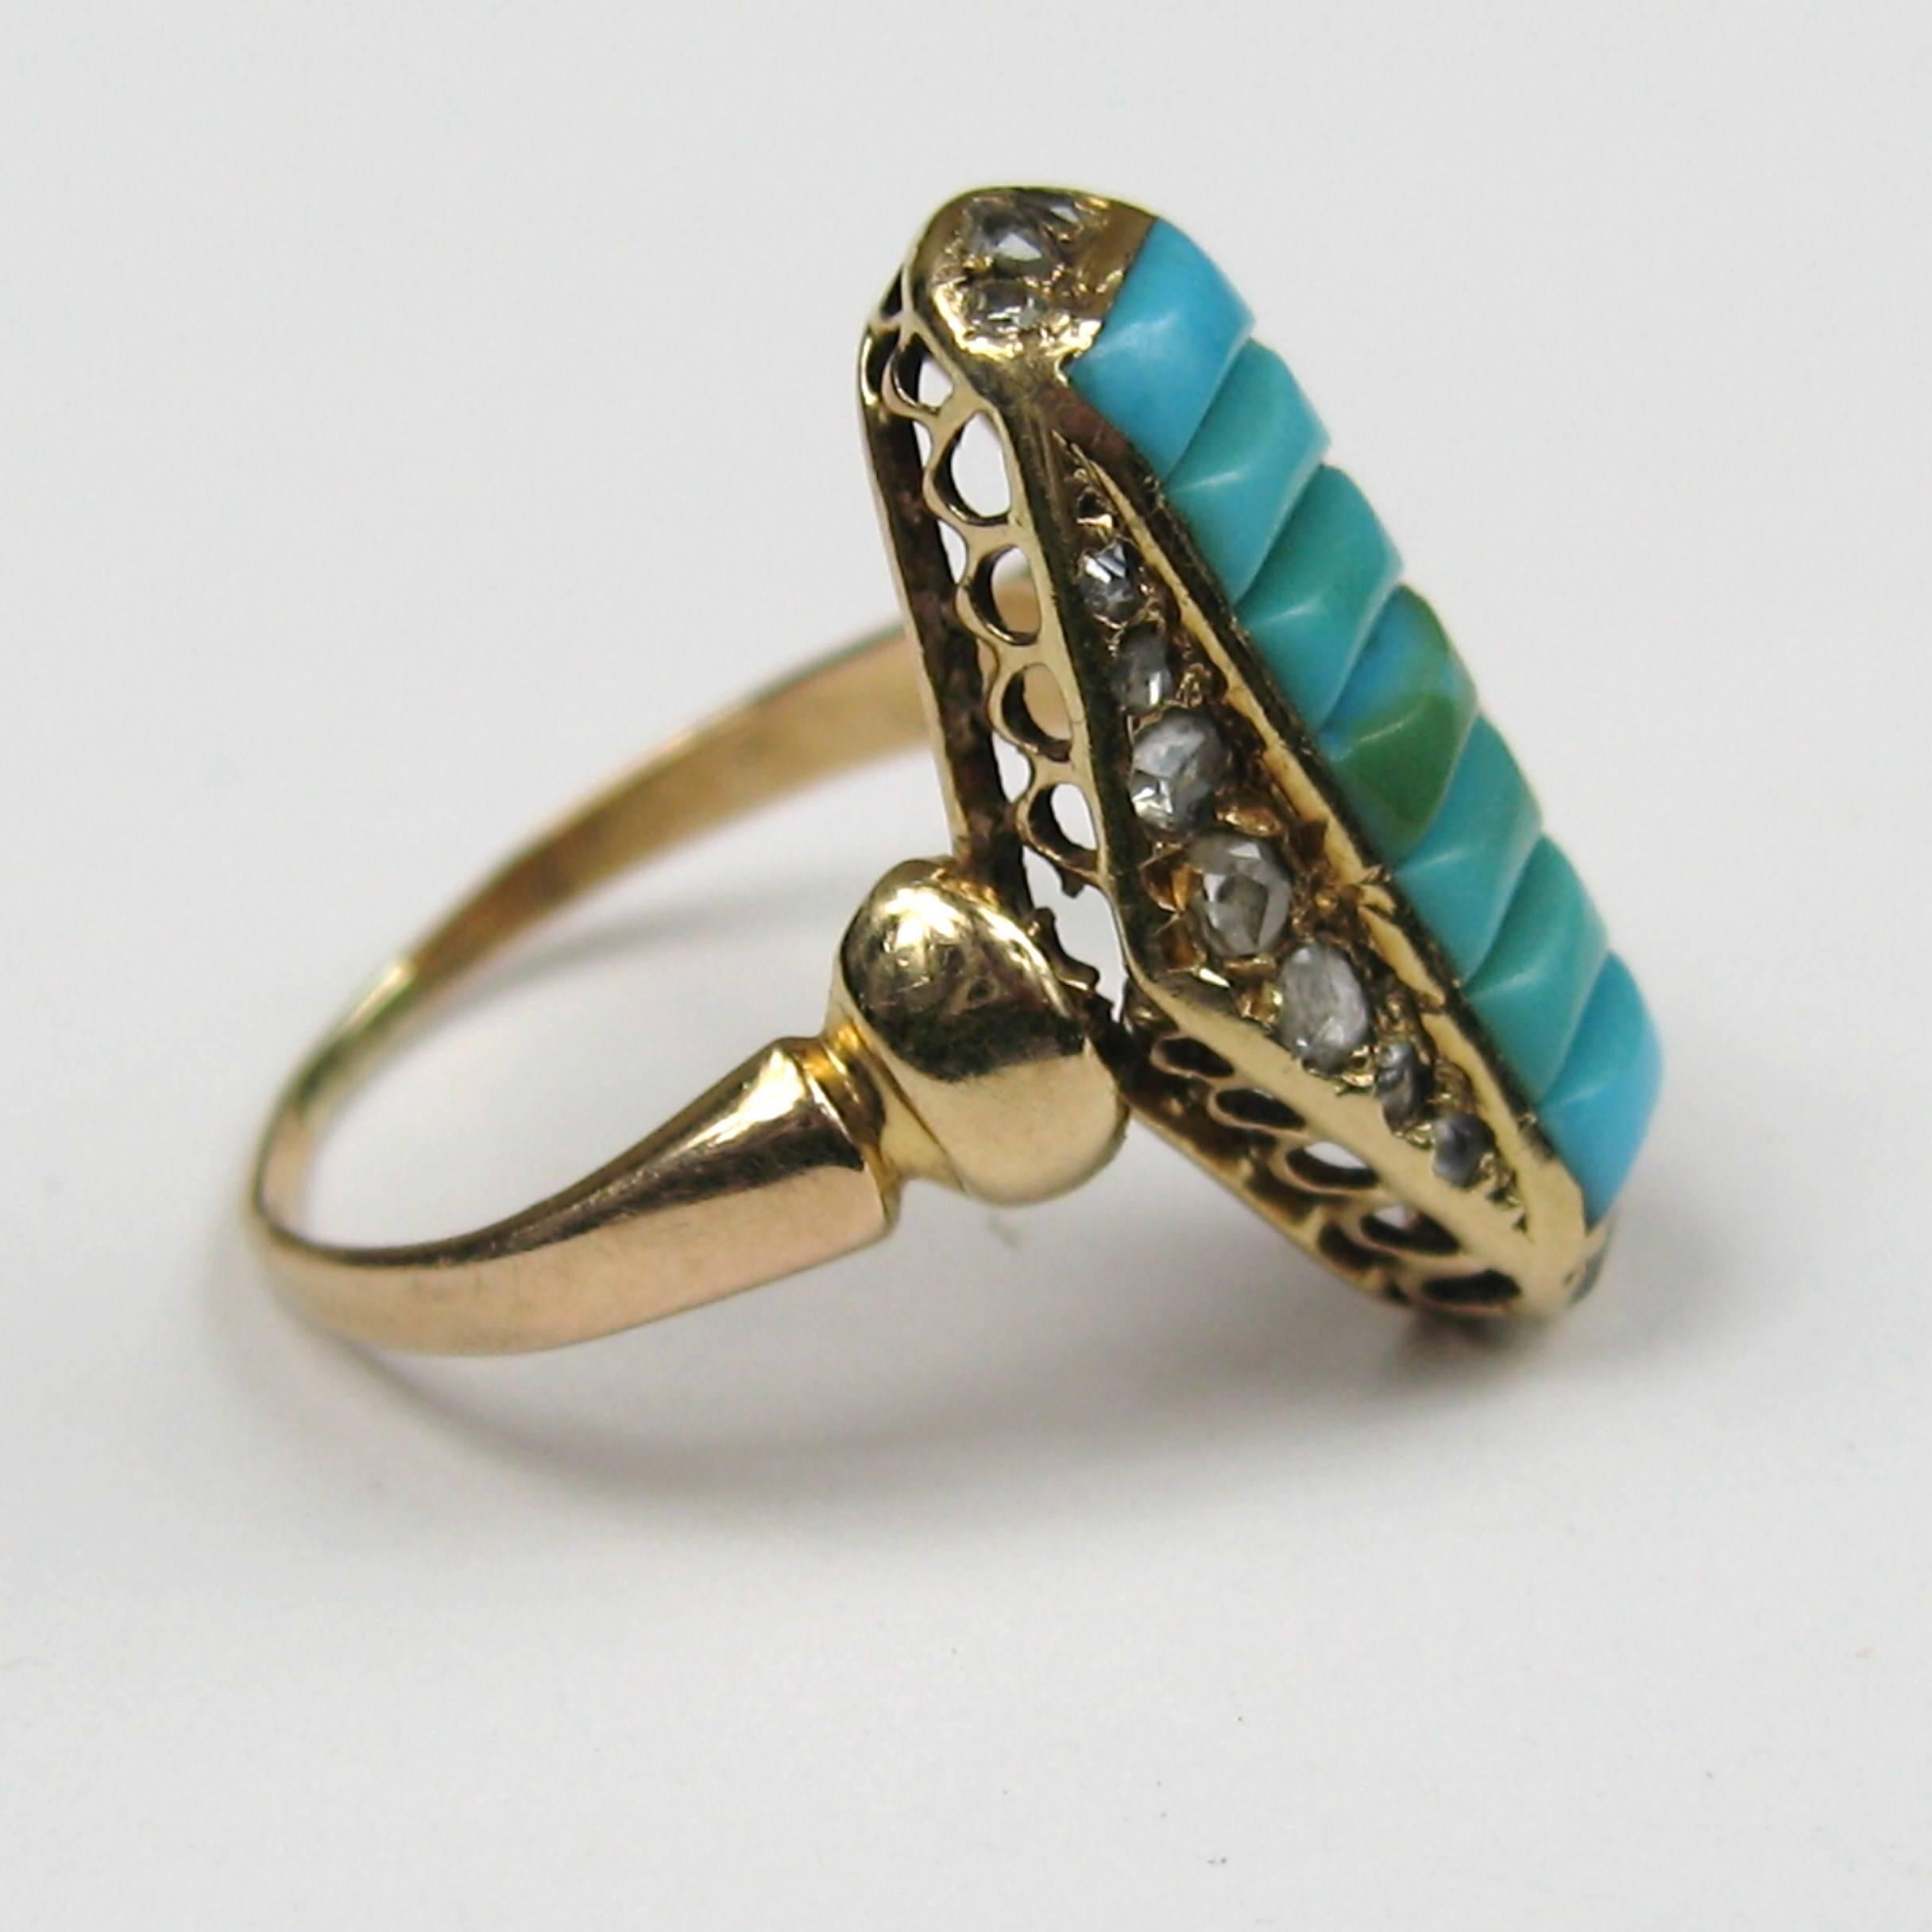 Stunning Petite Victorian Gold Turquoise and Mine Cut diamonds. Ring can be sized by us or your jeweler. It measures .72mm x .41mm. Please check our storefront for hundreds of items including New, Never worn vintage Jewelry as well as more vintage